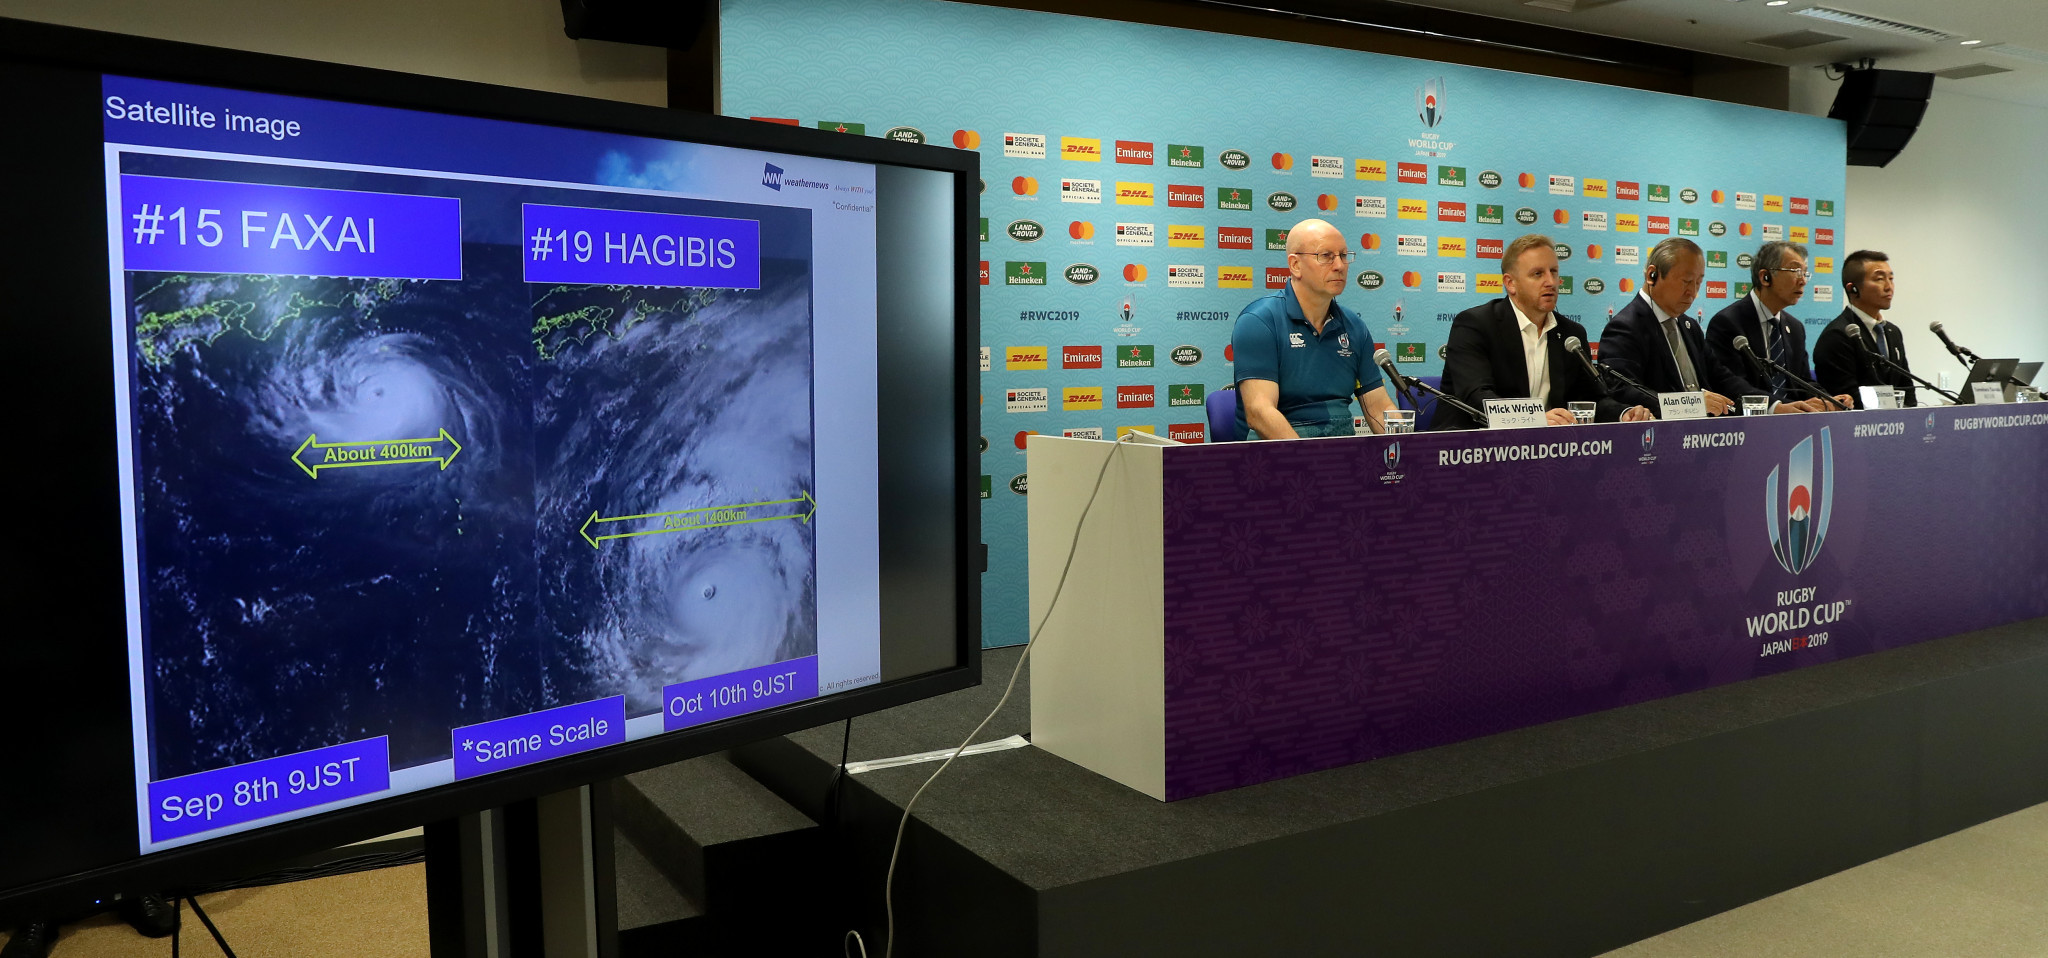 Typhoon Hagibis has been a major headache for Rugby World Cup organisers ©Getty Images